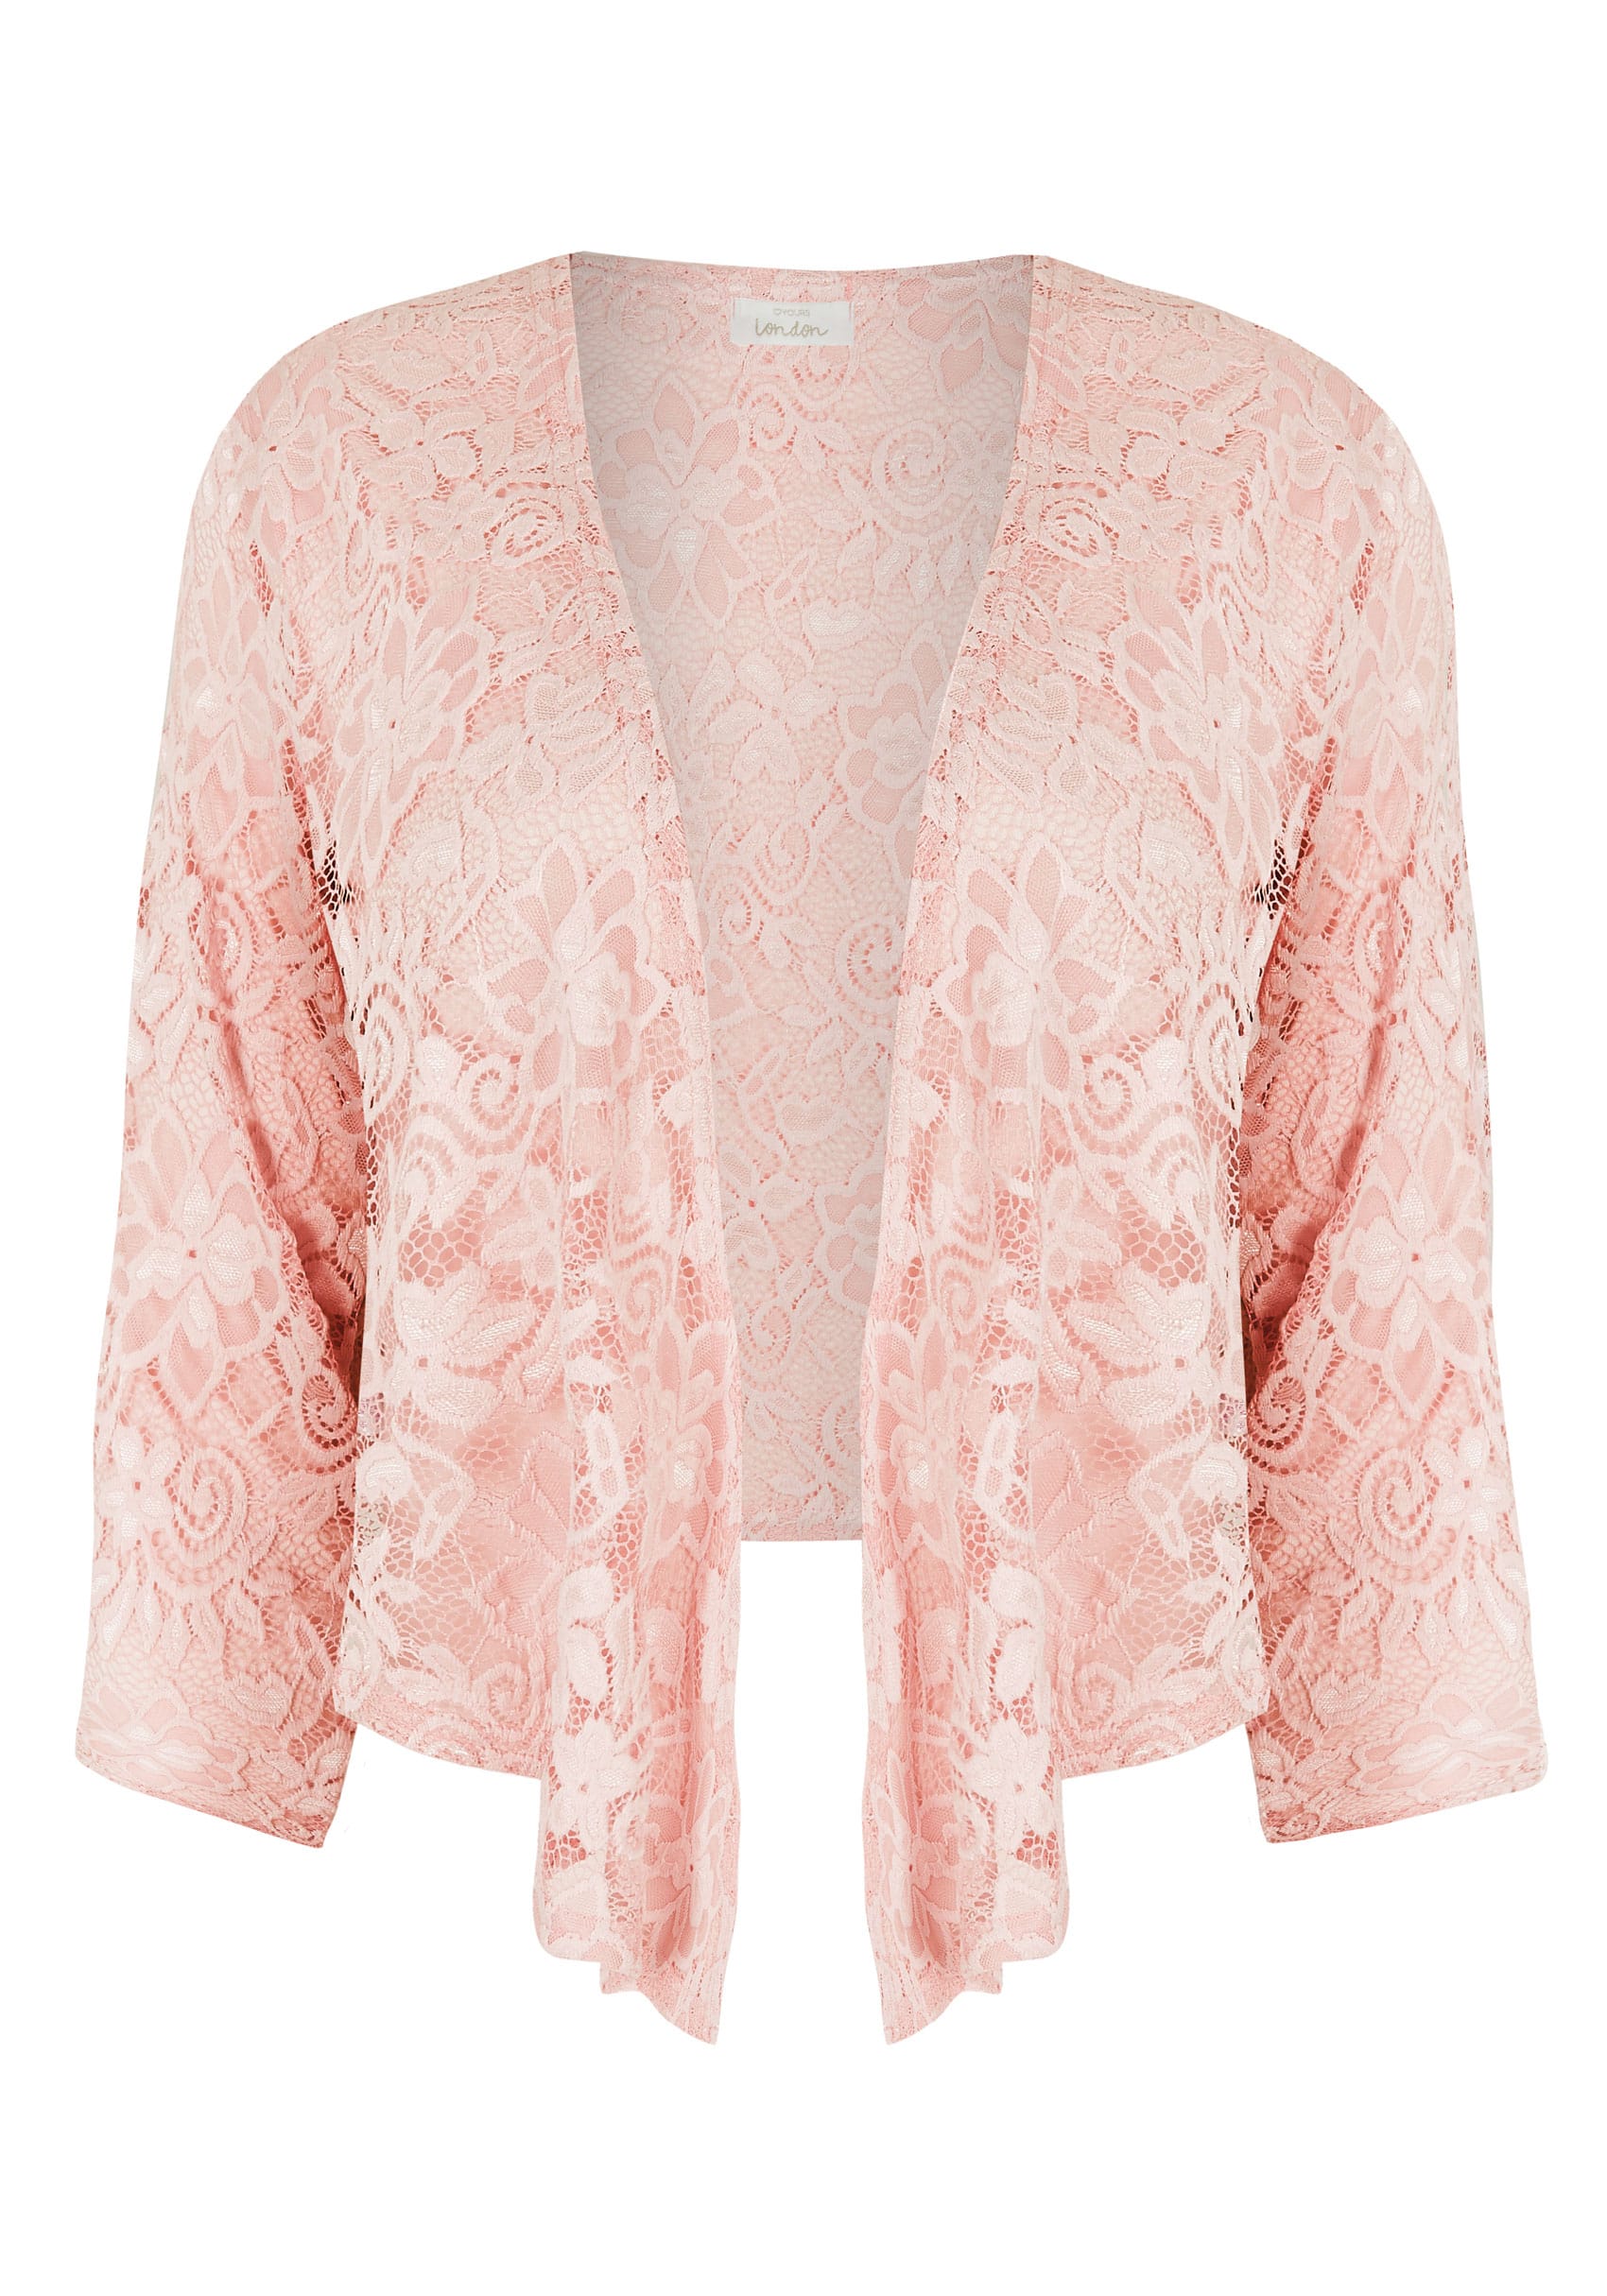 YOURS LONDON Pink Floral Lace Tie Shrug, plus size 16 to 32